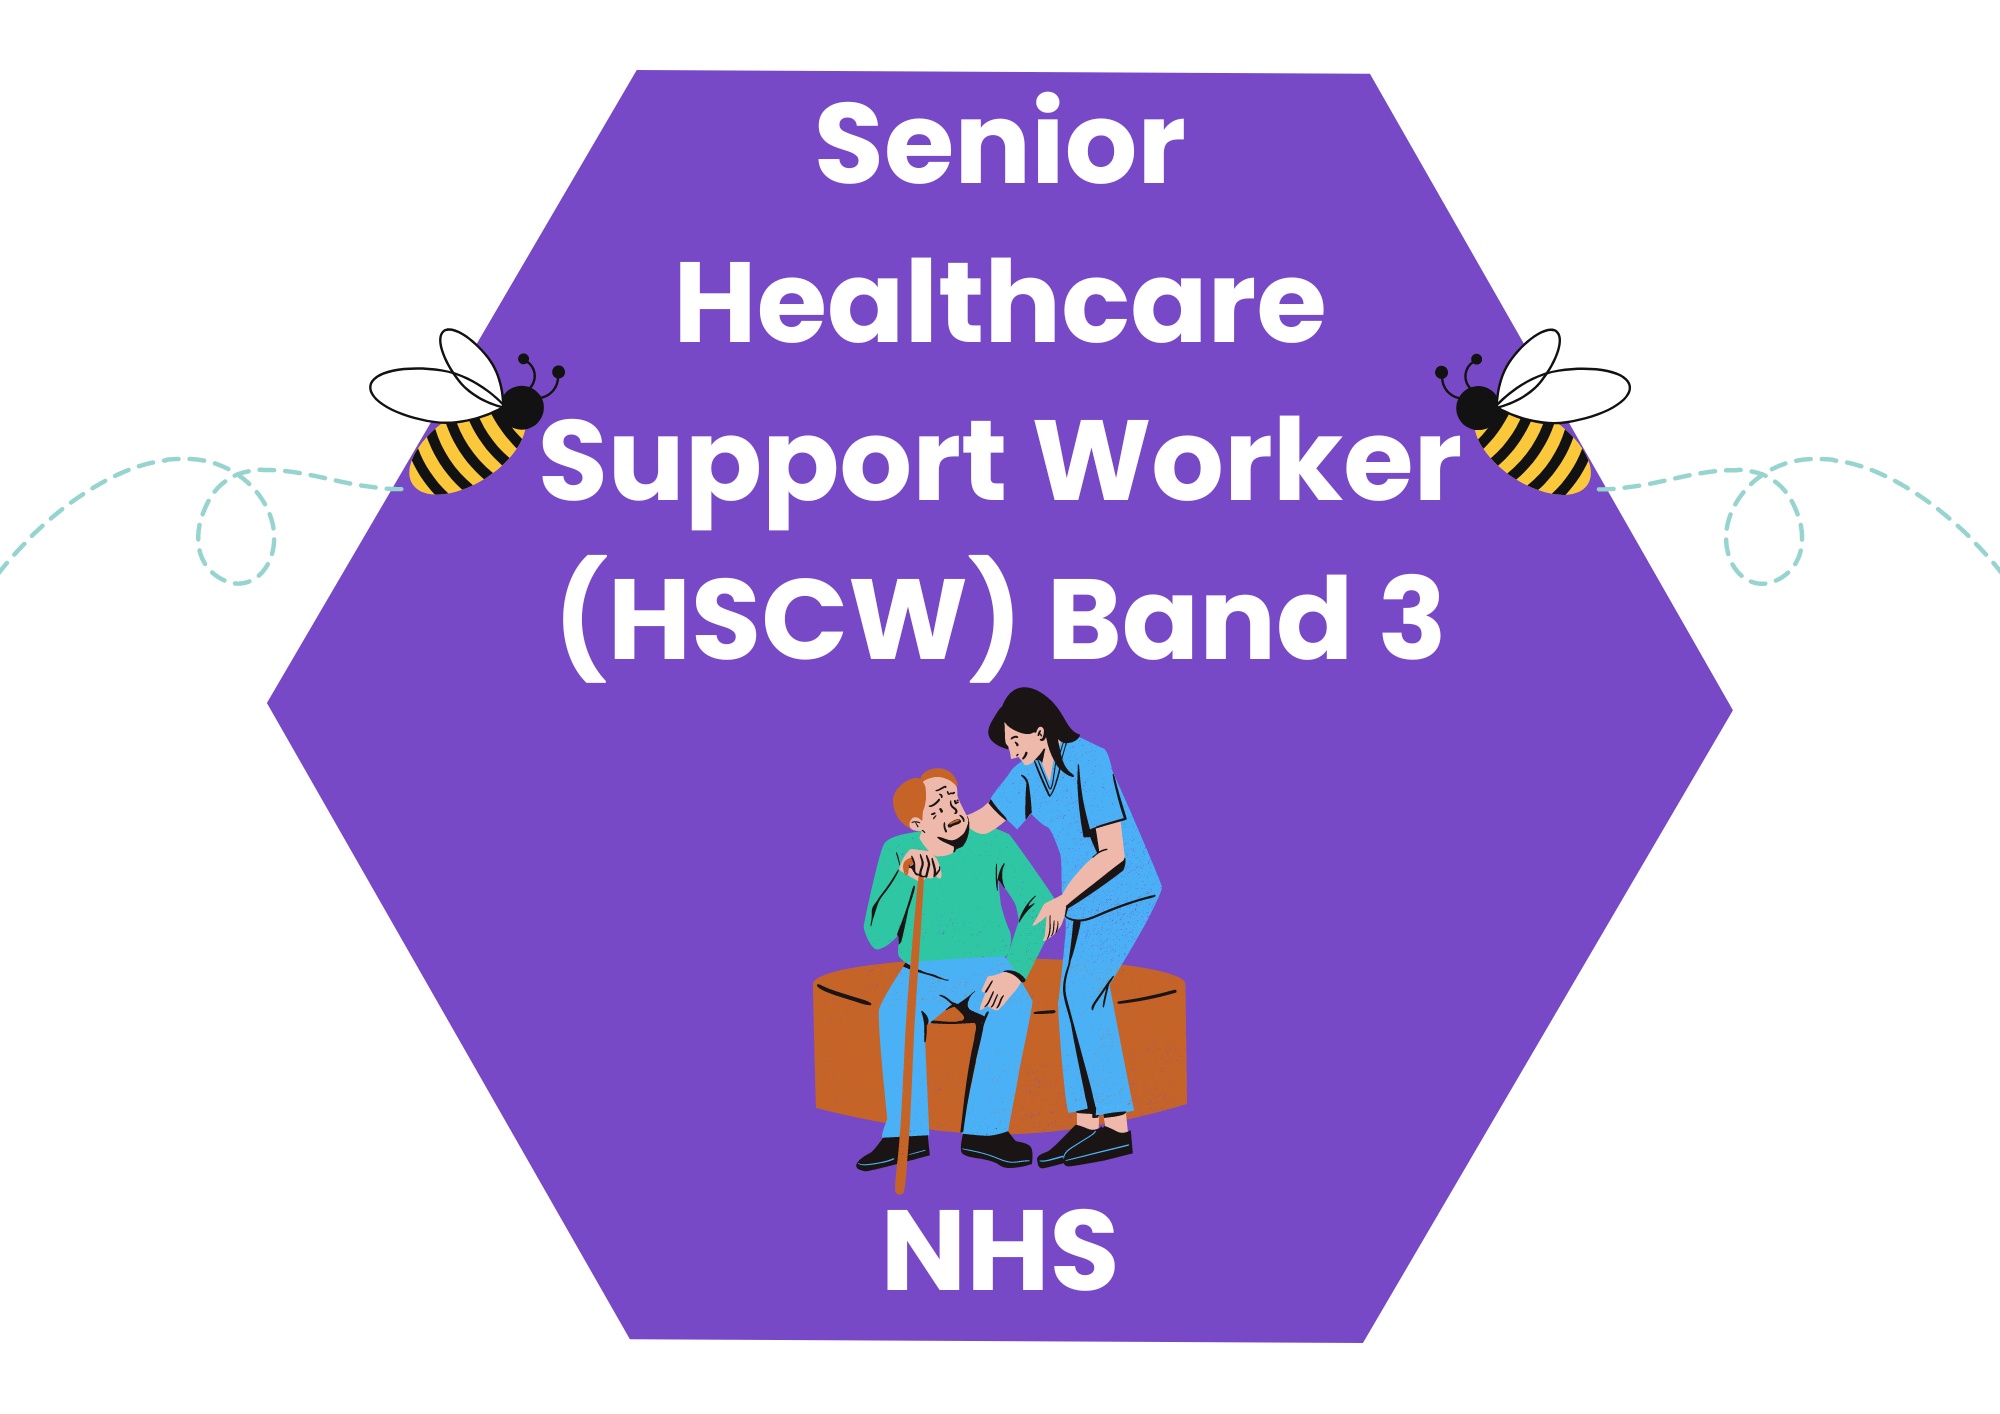 Senior HealthCare Support Worker (HCSW) Band 3 - NHS